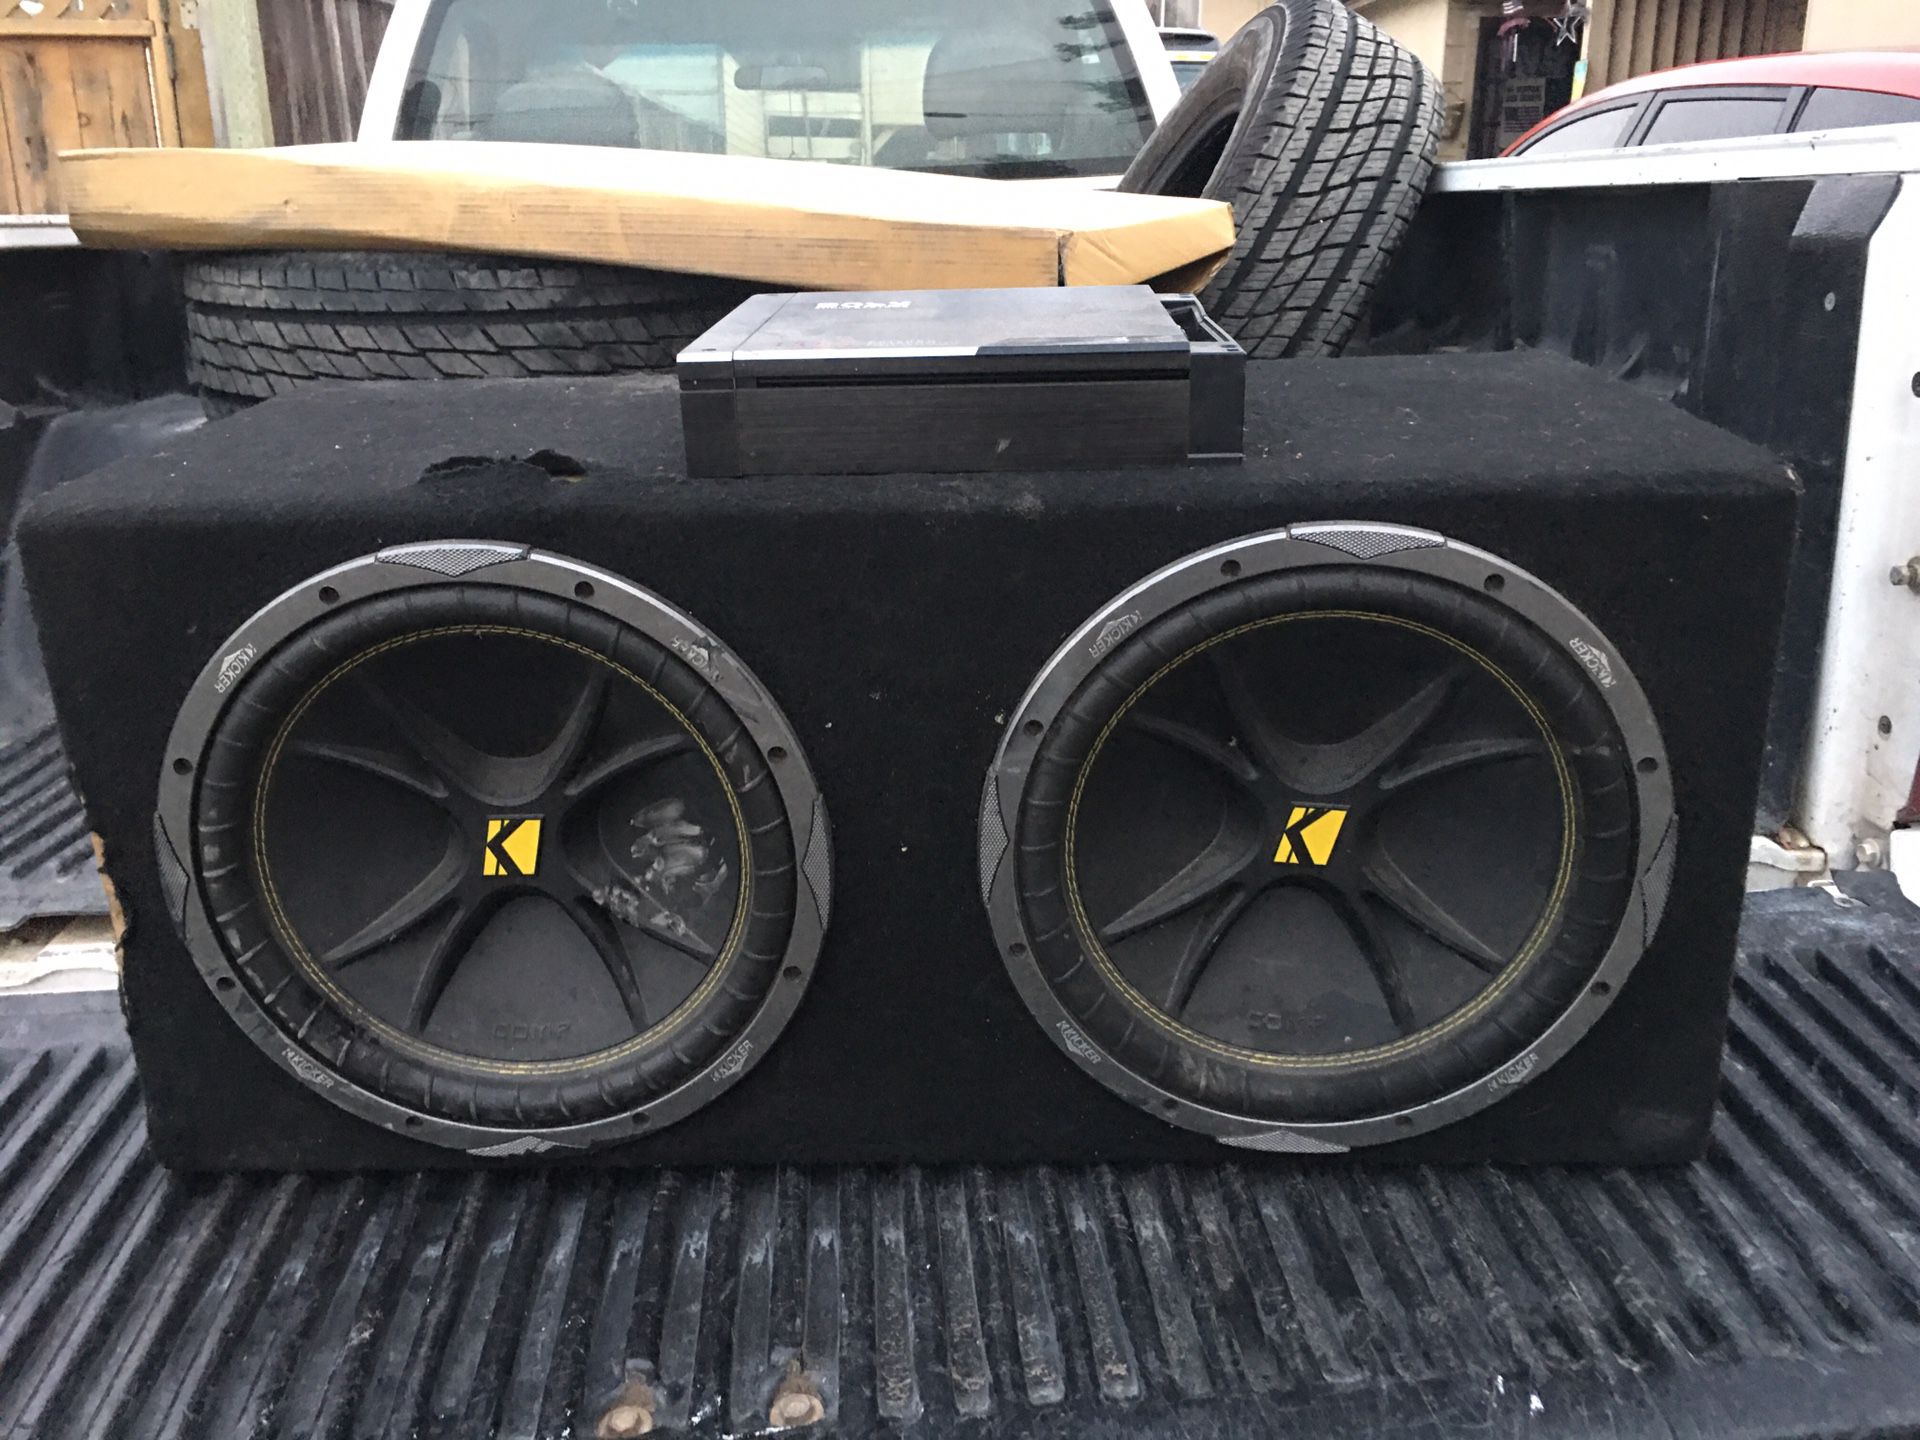 12 inch kickers competition with amplifier asking $200( I can drop off ASAP)